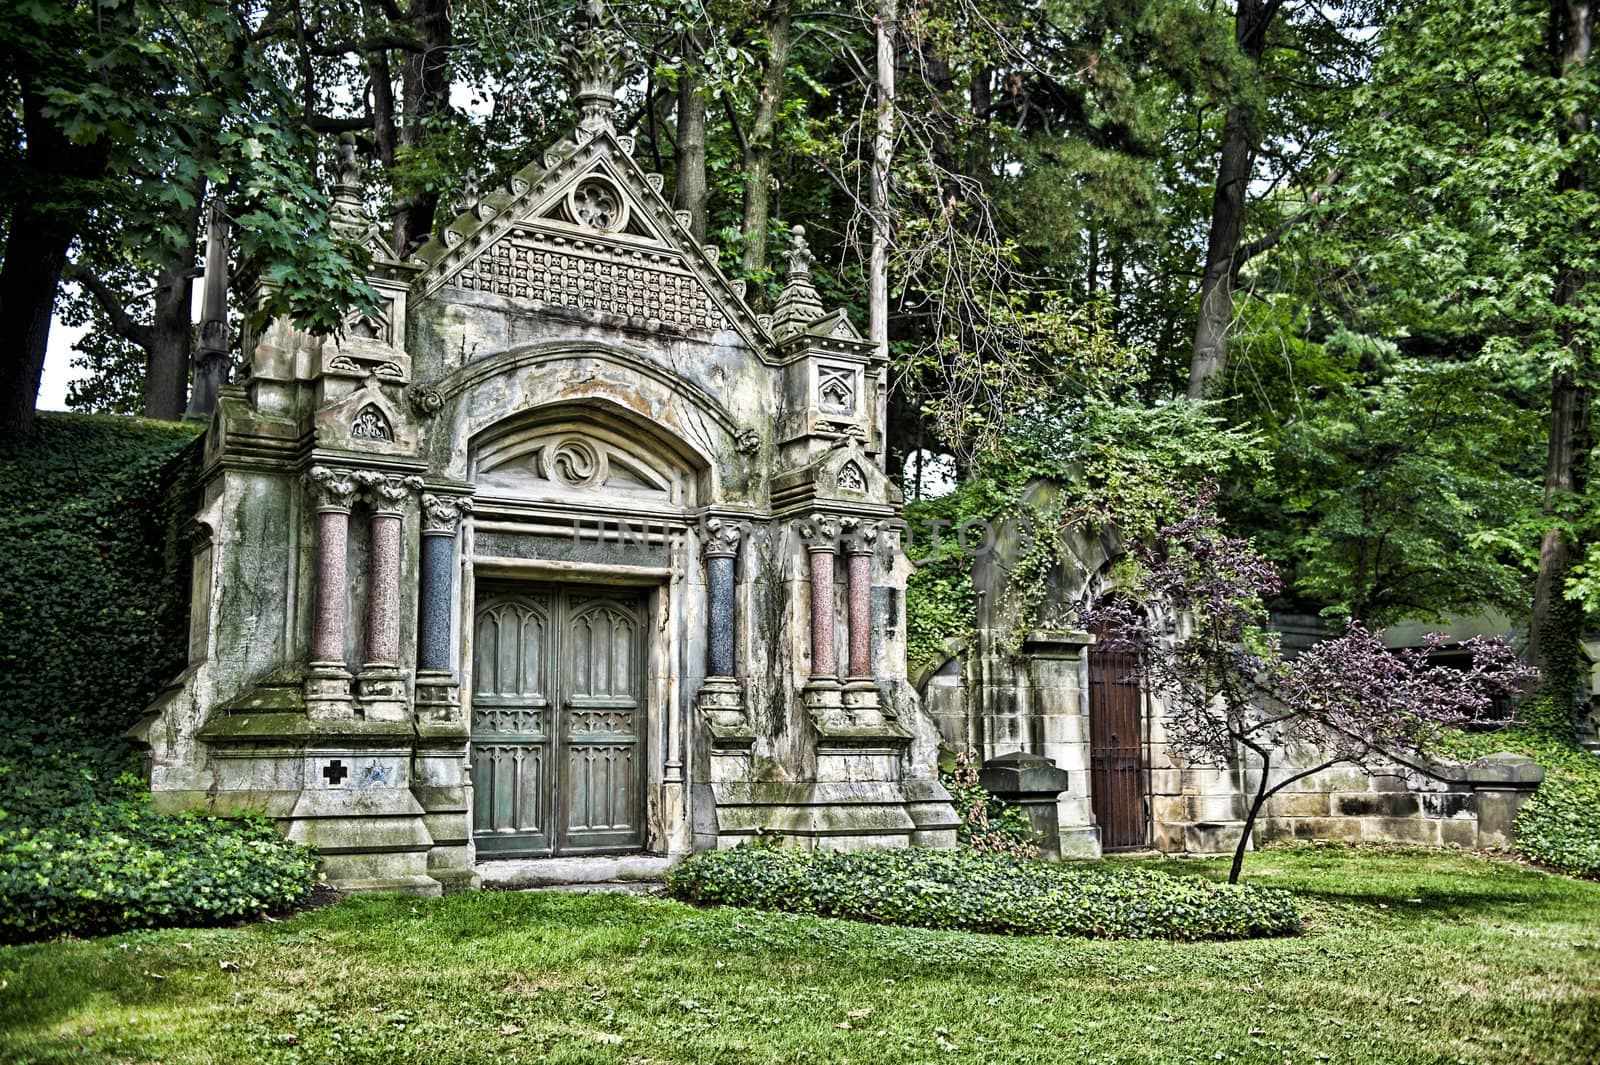 Image of a mausoleum in a cemetary